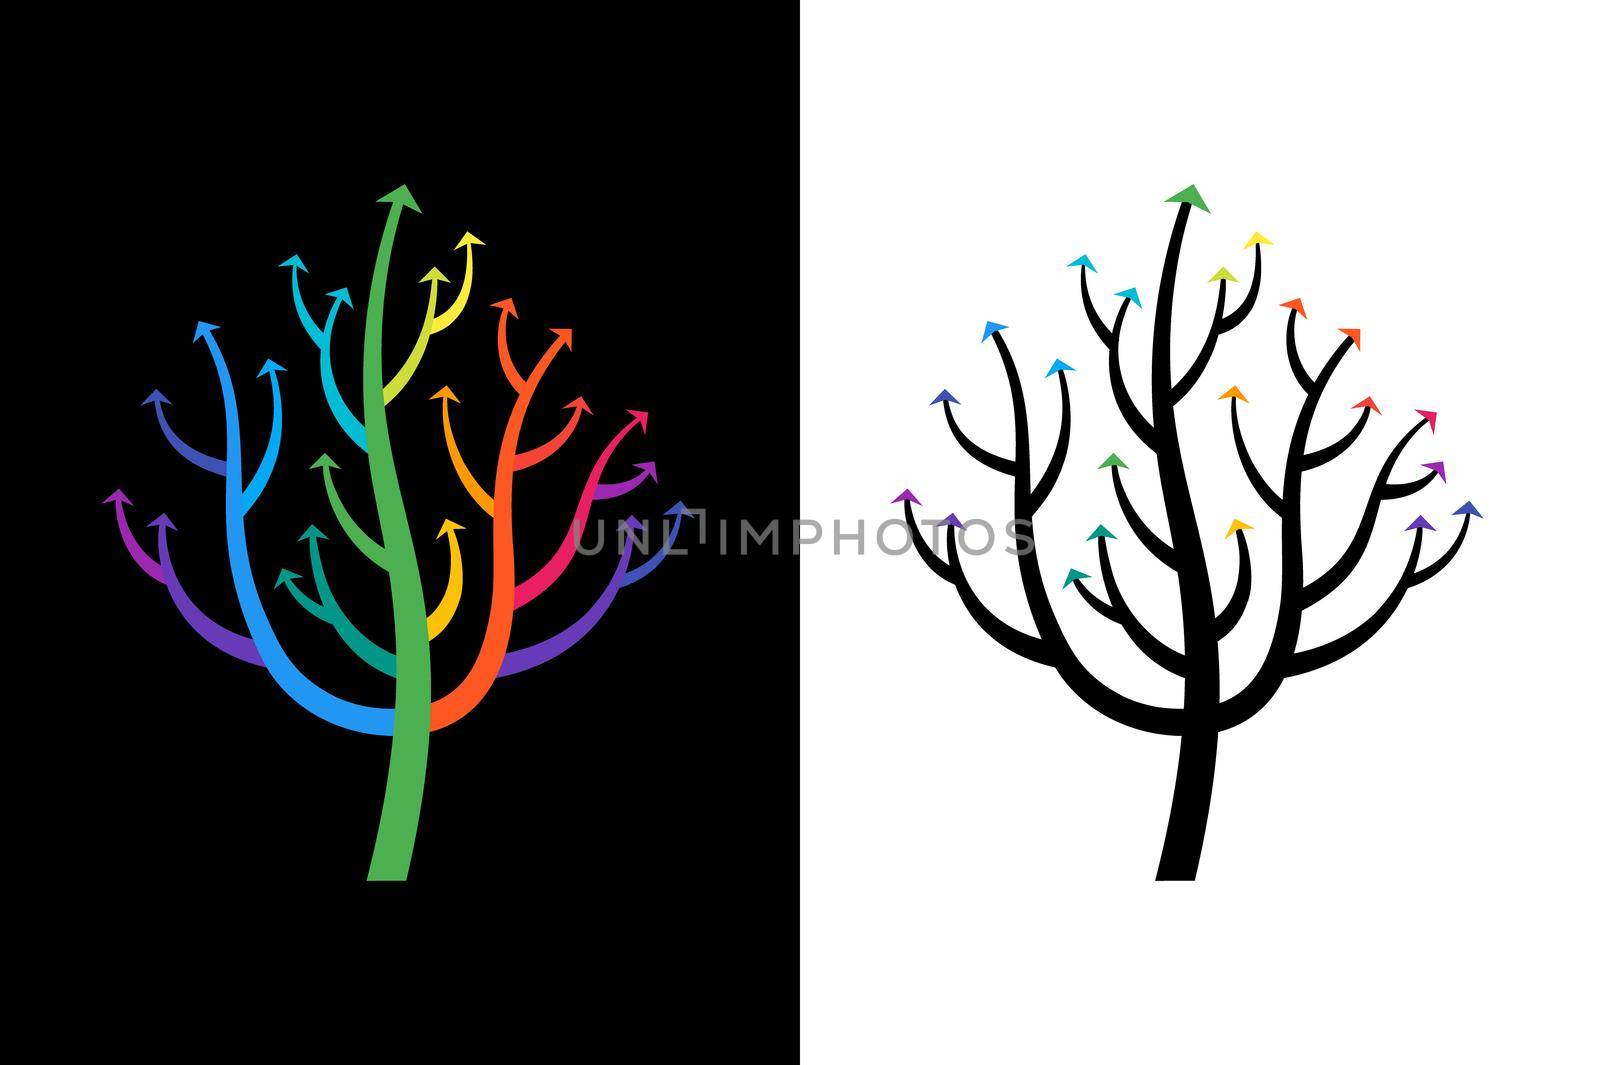 Abstract Growing Arrow Tree That Symbolizes Development And Growth. Conceptual Vector Illustration.